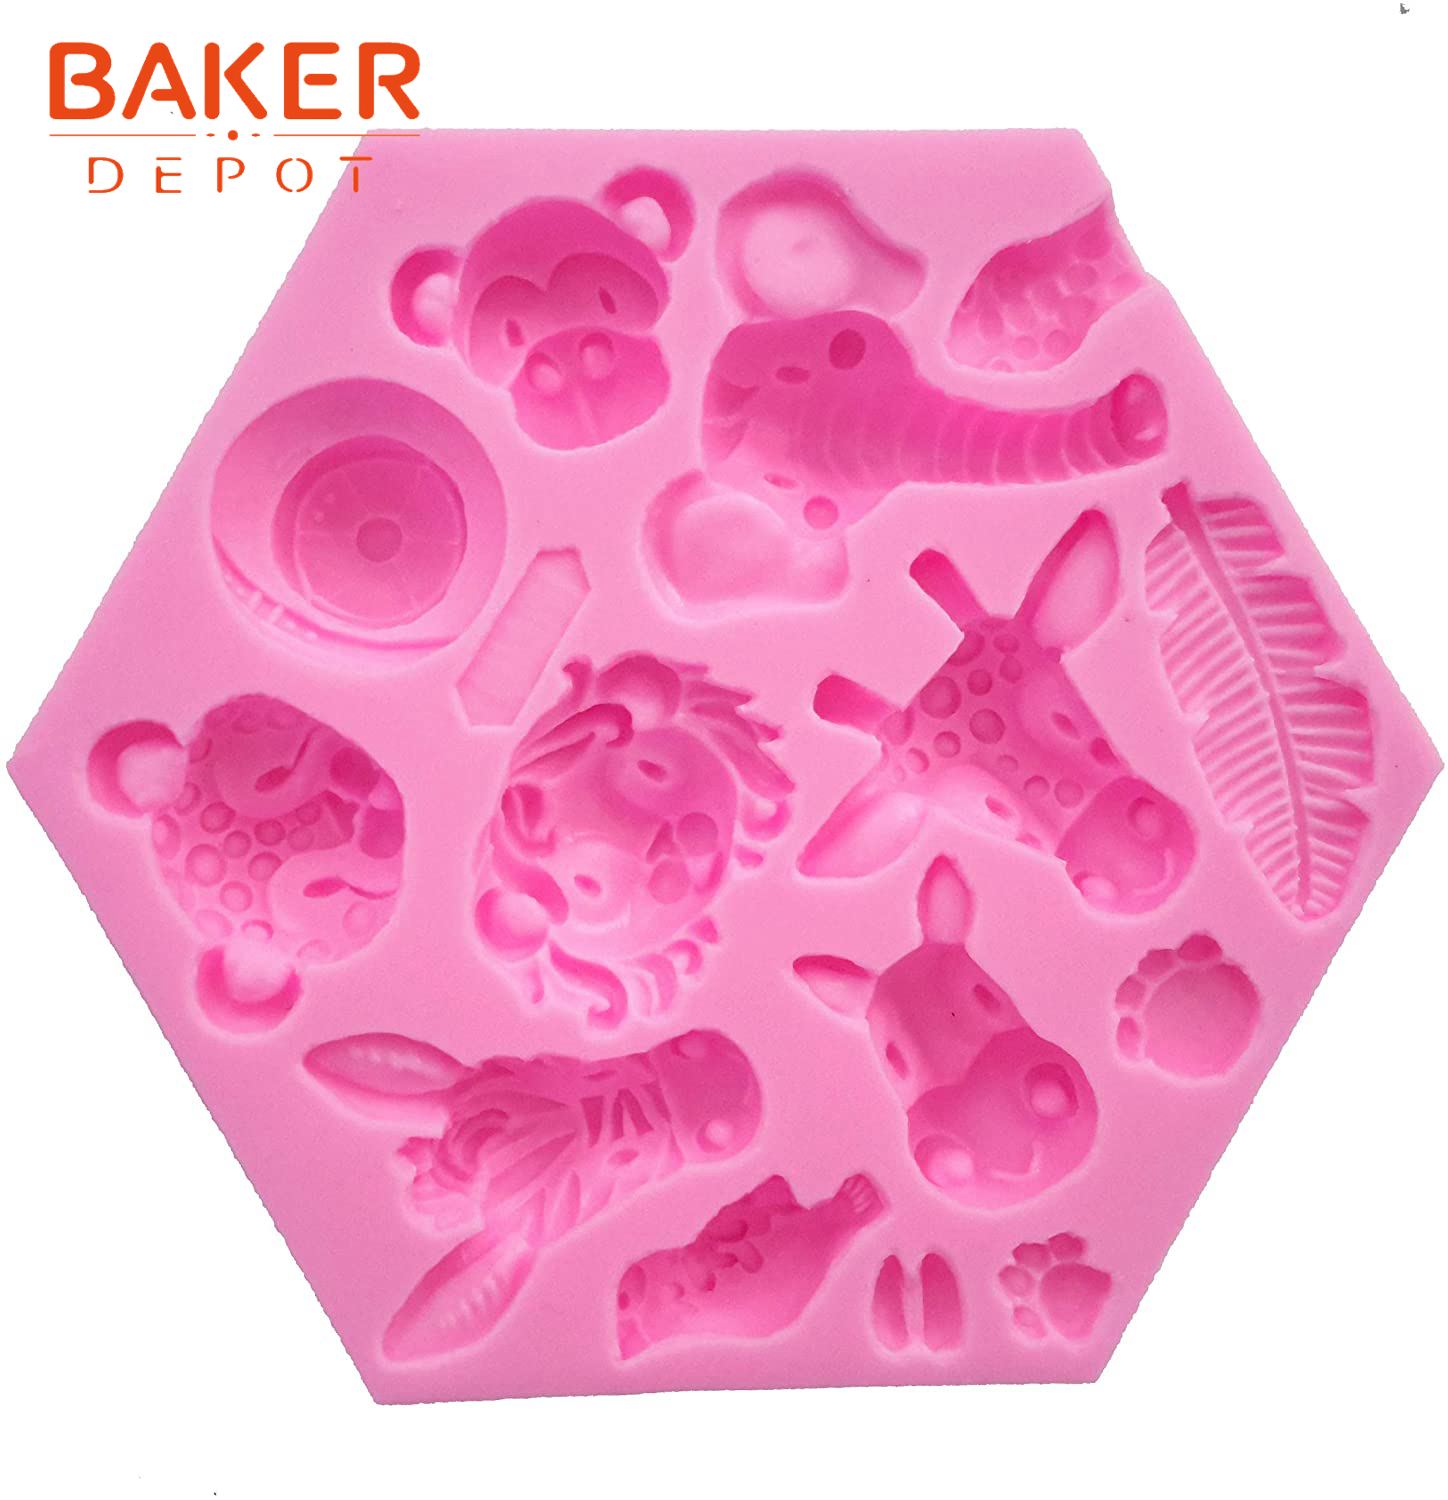 Animal Shape Candy Molds Silicone Gummy Jello Molds For Kids Animal Soap  Molds 3D Car Shape